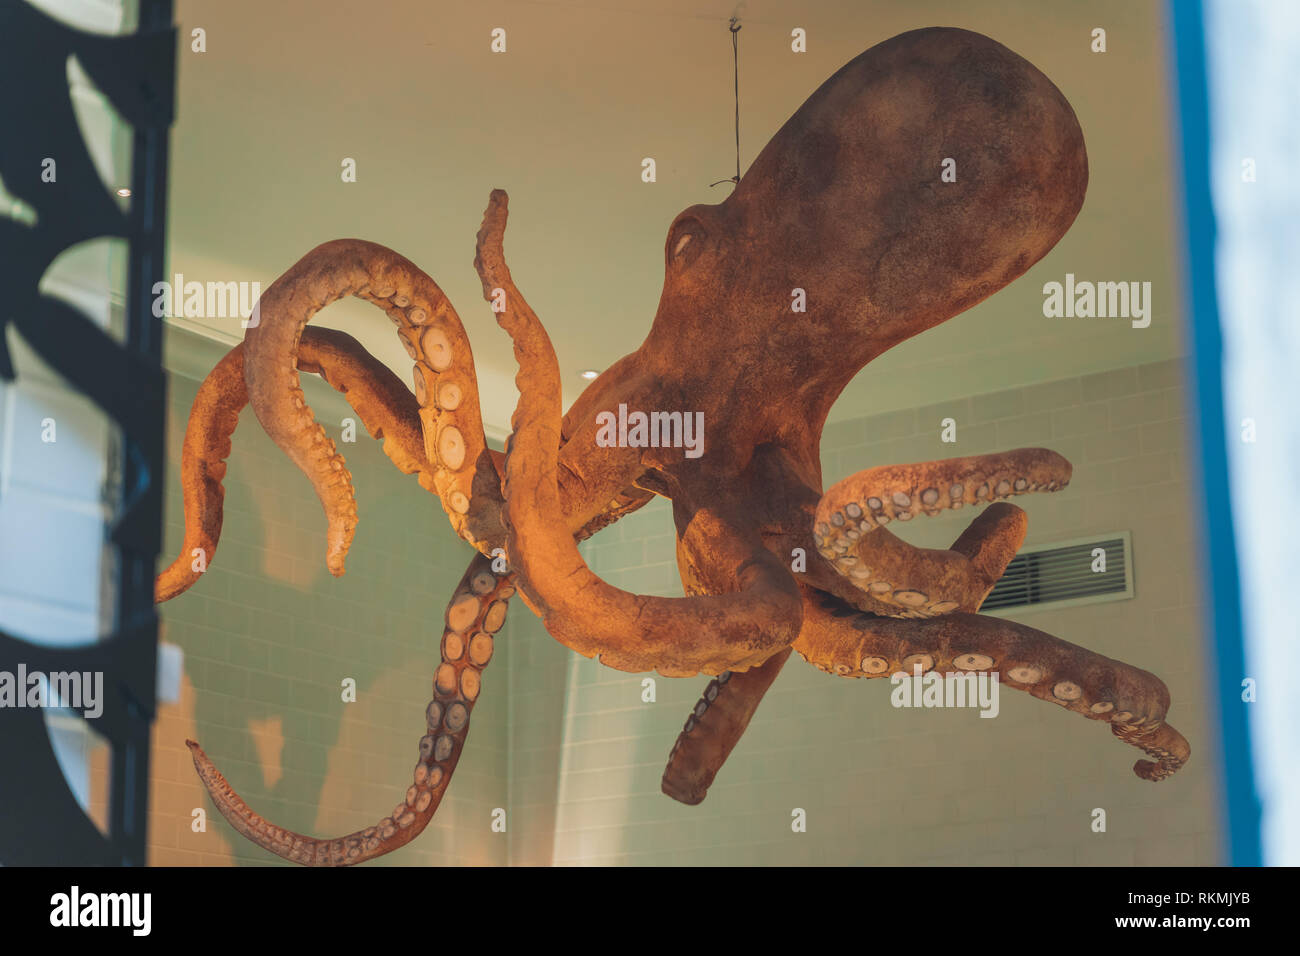 Lisbon, Portugal - 01/03/19: Giant Octopus in the Ceiling of a shop in downtown Chiado, close to Principe Real, royal prince gardens. Red and Green ba Stock Photo